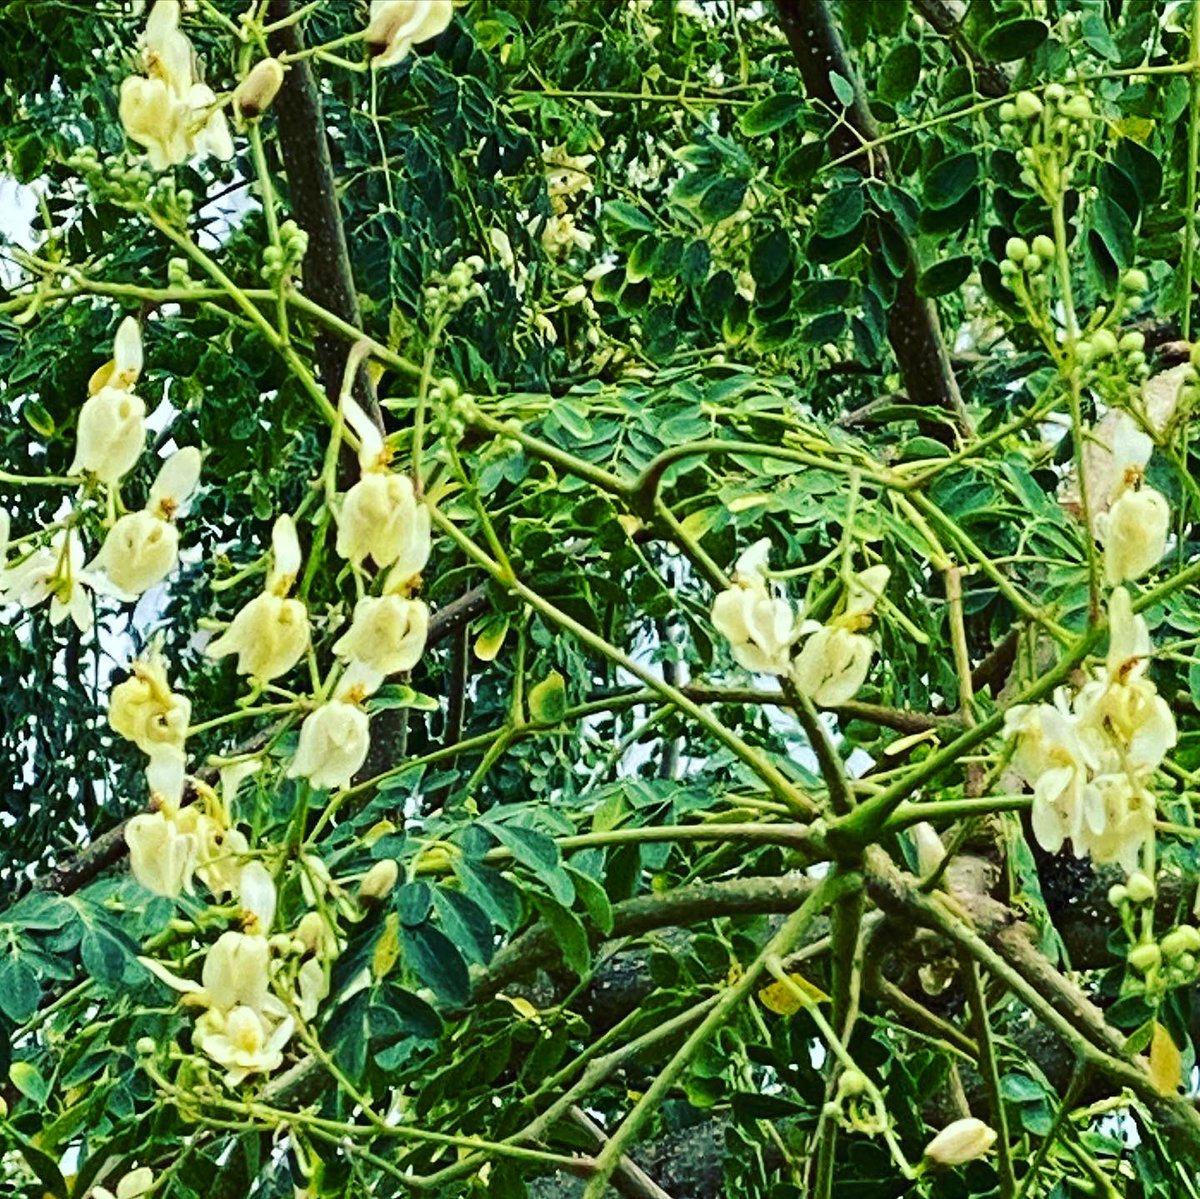 Munga/ Moringaceae/ Moringa/ Drumstick is a fast-growing tree upto 10–12 m/ 32–40 ft tall, trunk diameter 45 cm/ 1.5 ft. Propagated from cuttings or seeds, it begins to flower within first 6 months,flowers once a year in cold regions & throughout the year constant temperatures.  https://twitter.com/meenakshisharan/status/1337047395725697024